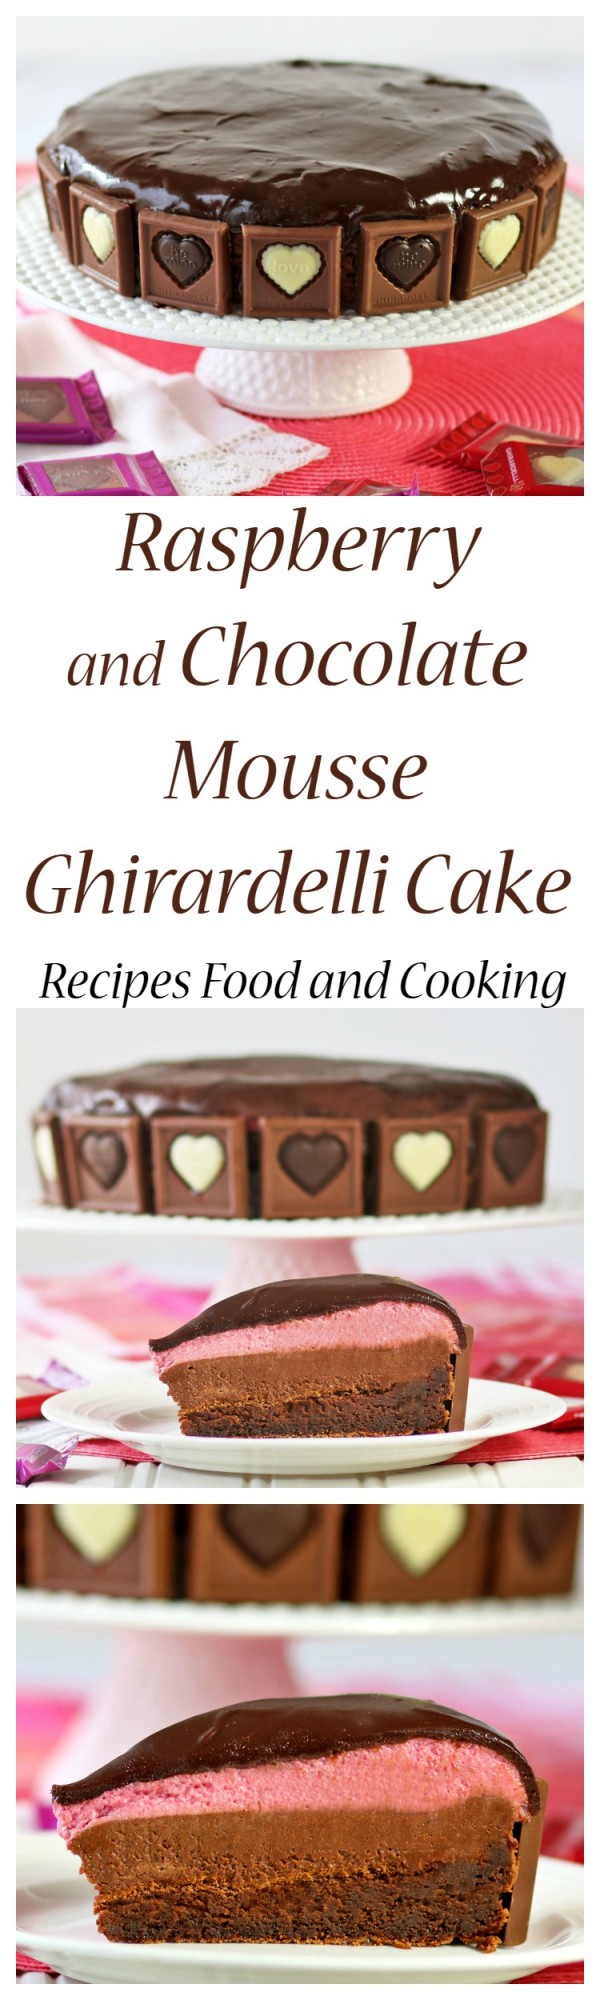 Raspberry and Chocolate Mousse Ghirardelli Cake